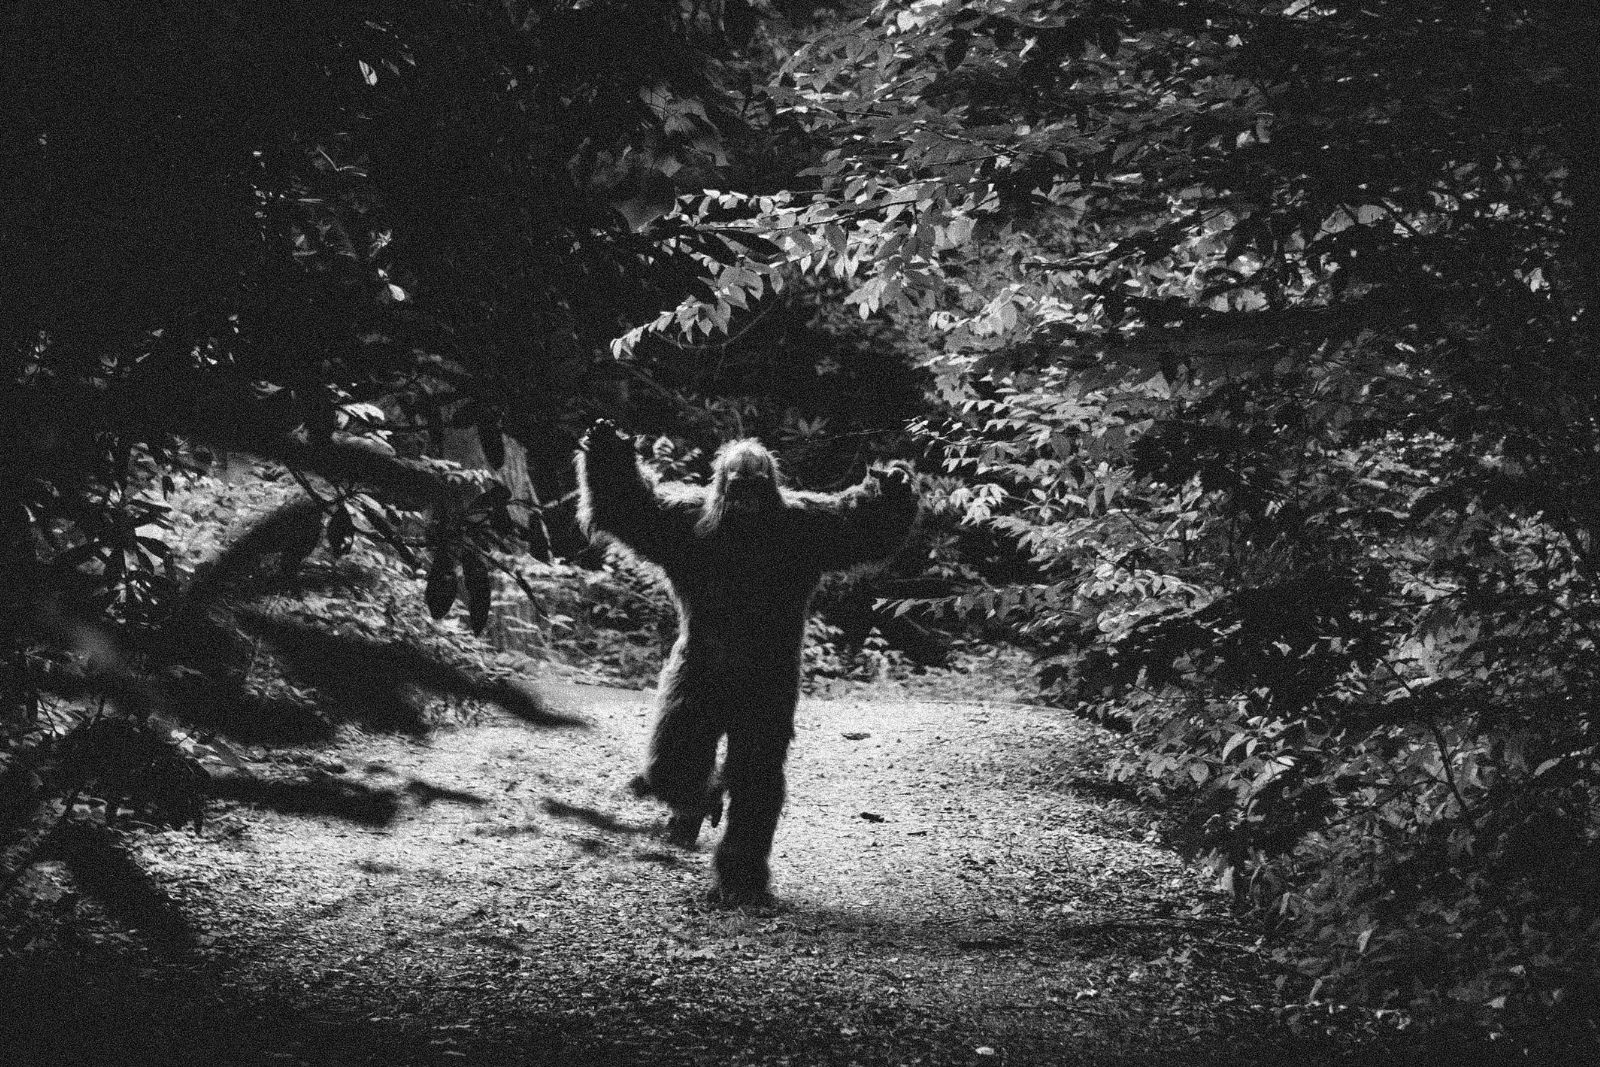 5 Times Bigfoot Was Seen Recently In Washington State